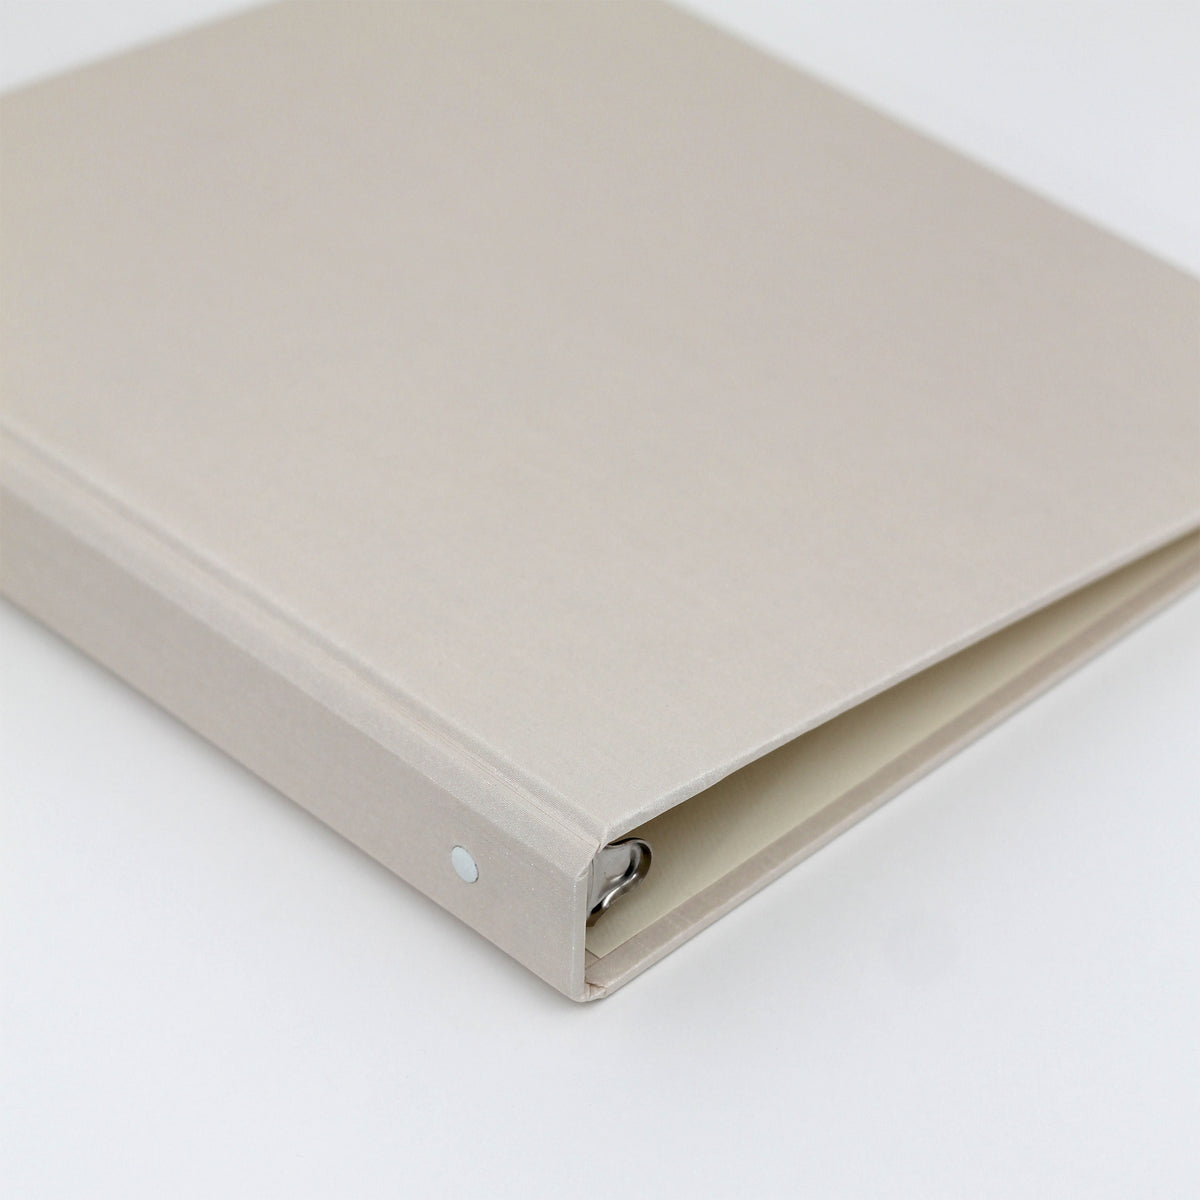 Storage Binder for Photos or Documents with Champagne Silk Cover